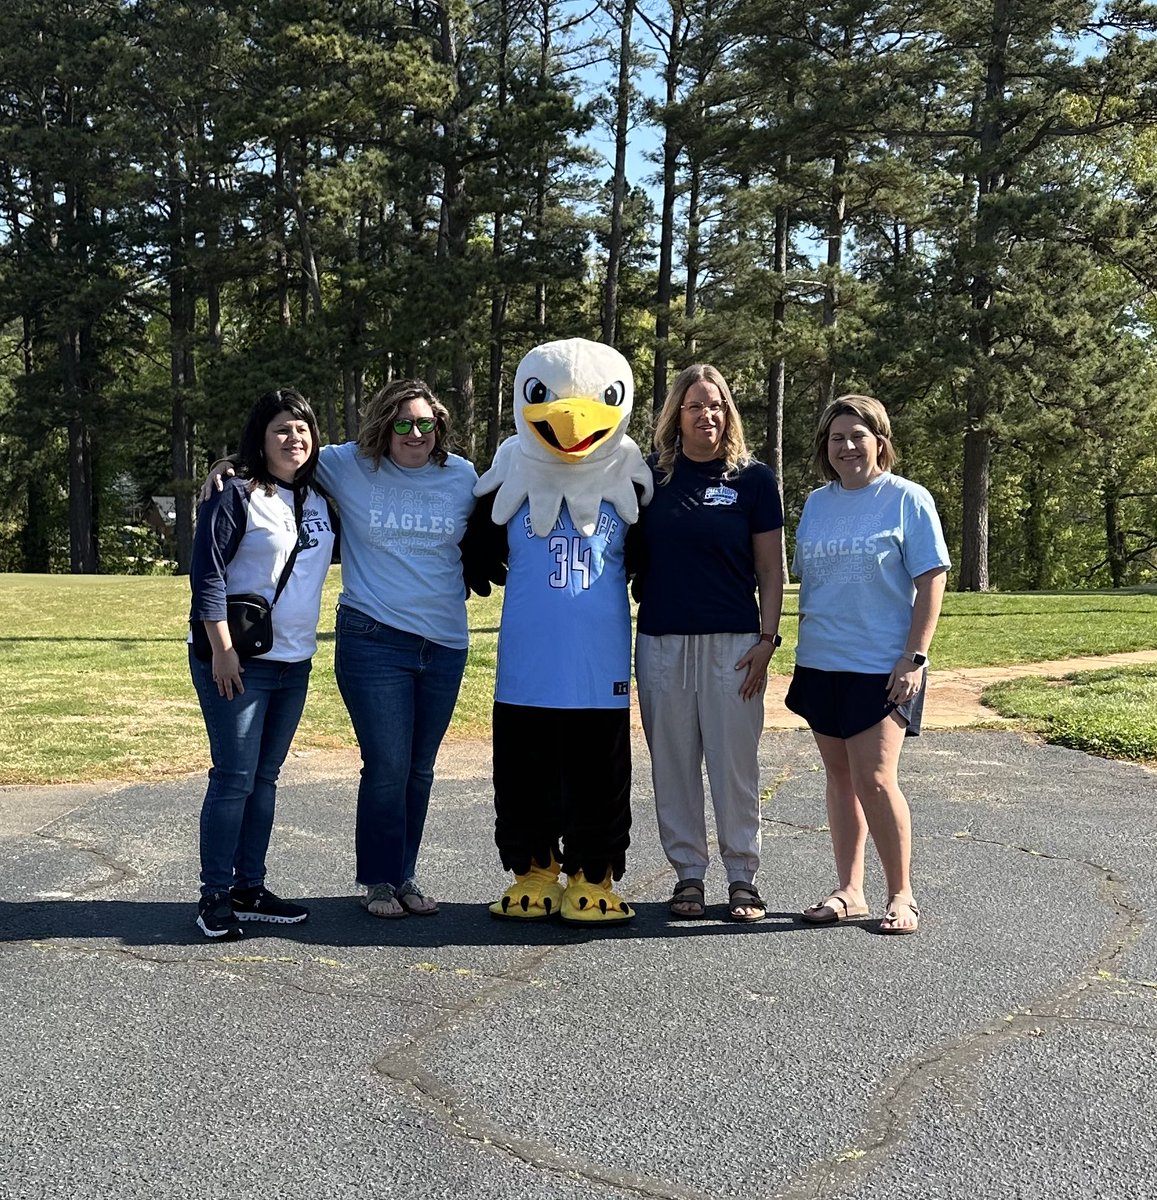 Way to go @SilkHopeEagles PTA! What an amazing turnout for the first golf tournament! And the weather… couldn’t ask for a better day to be outside! ⛳️